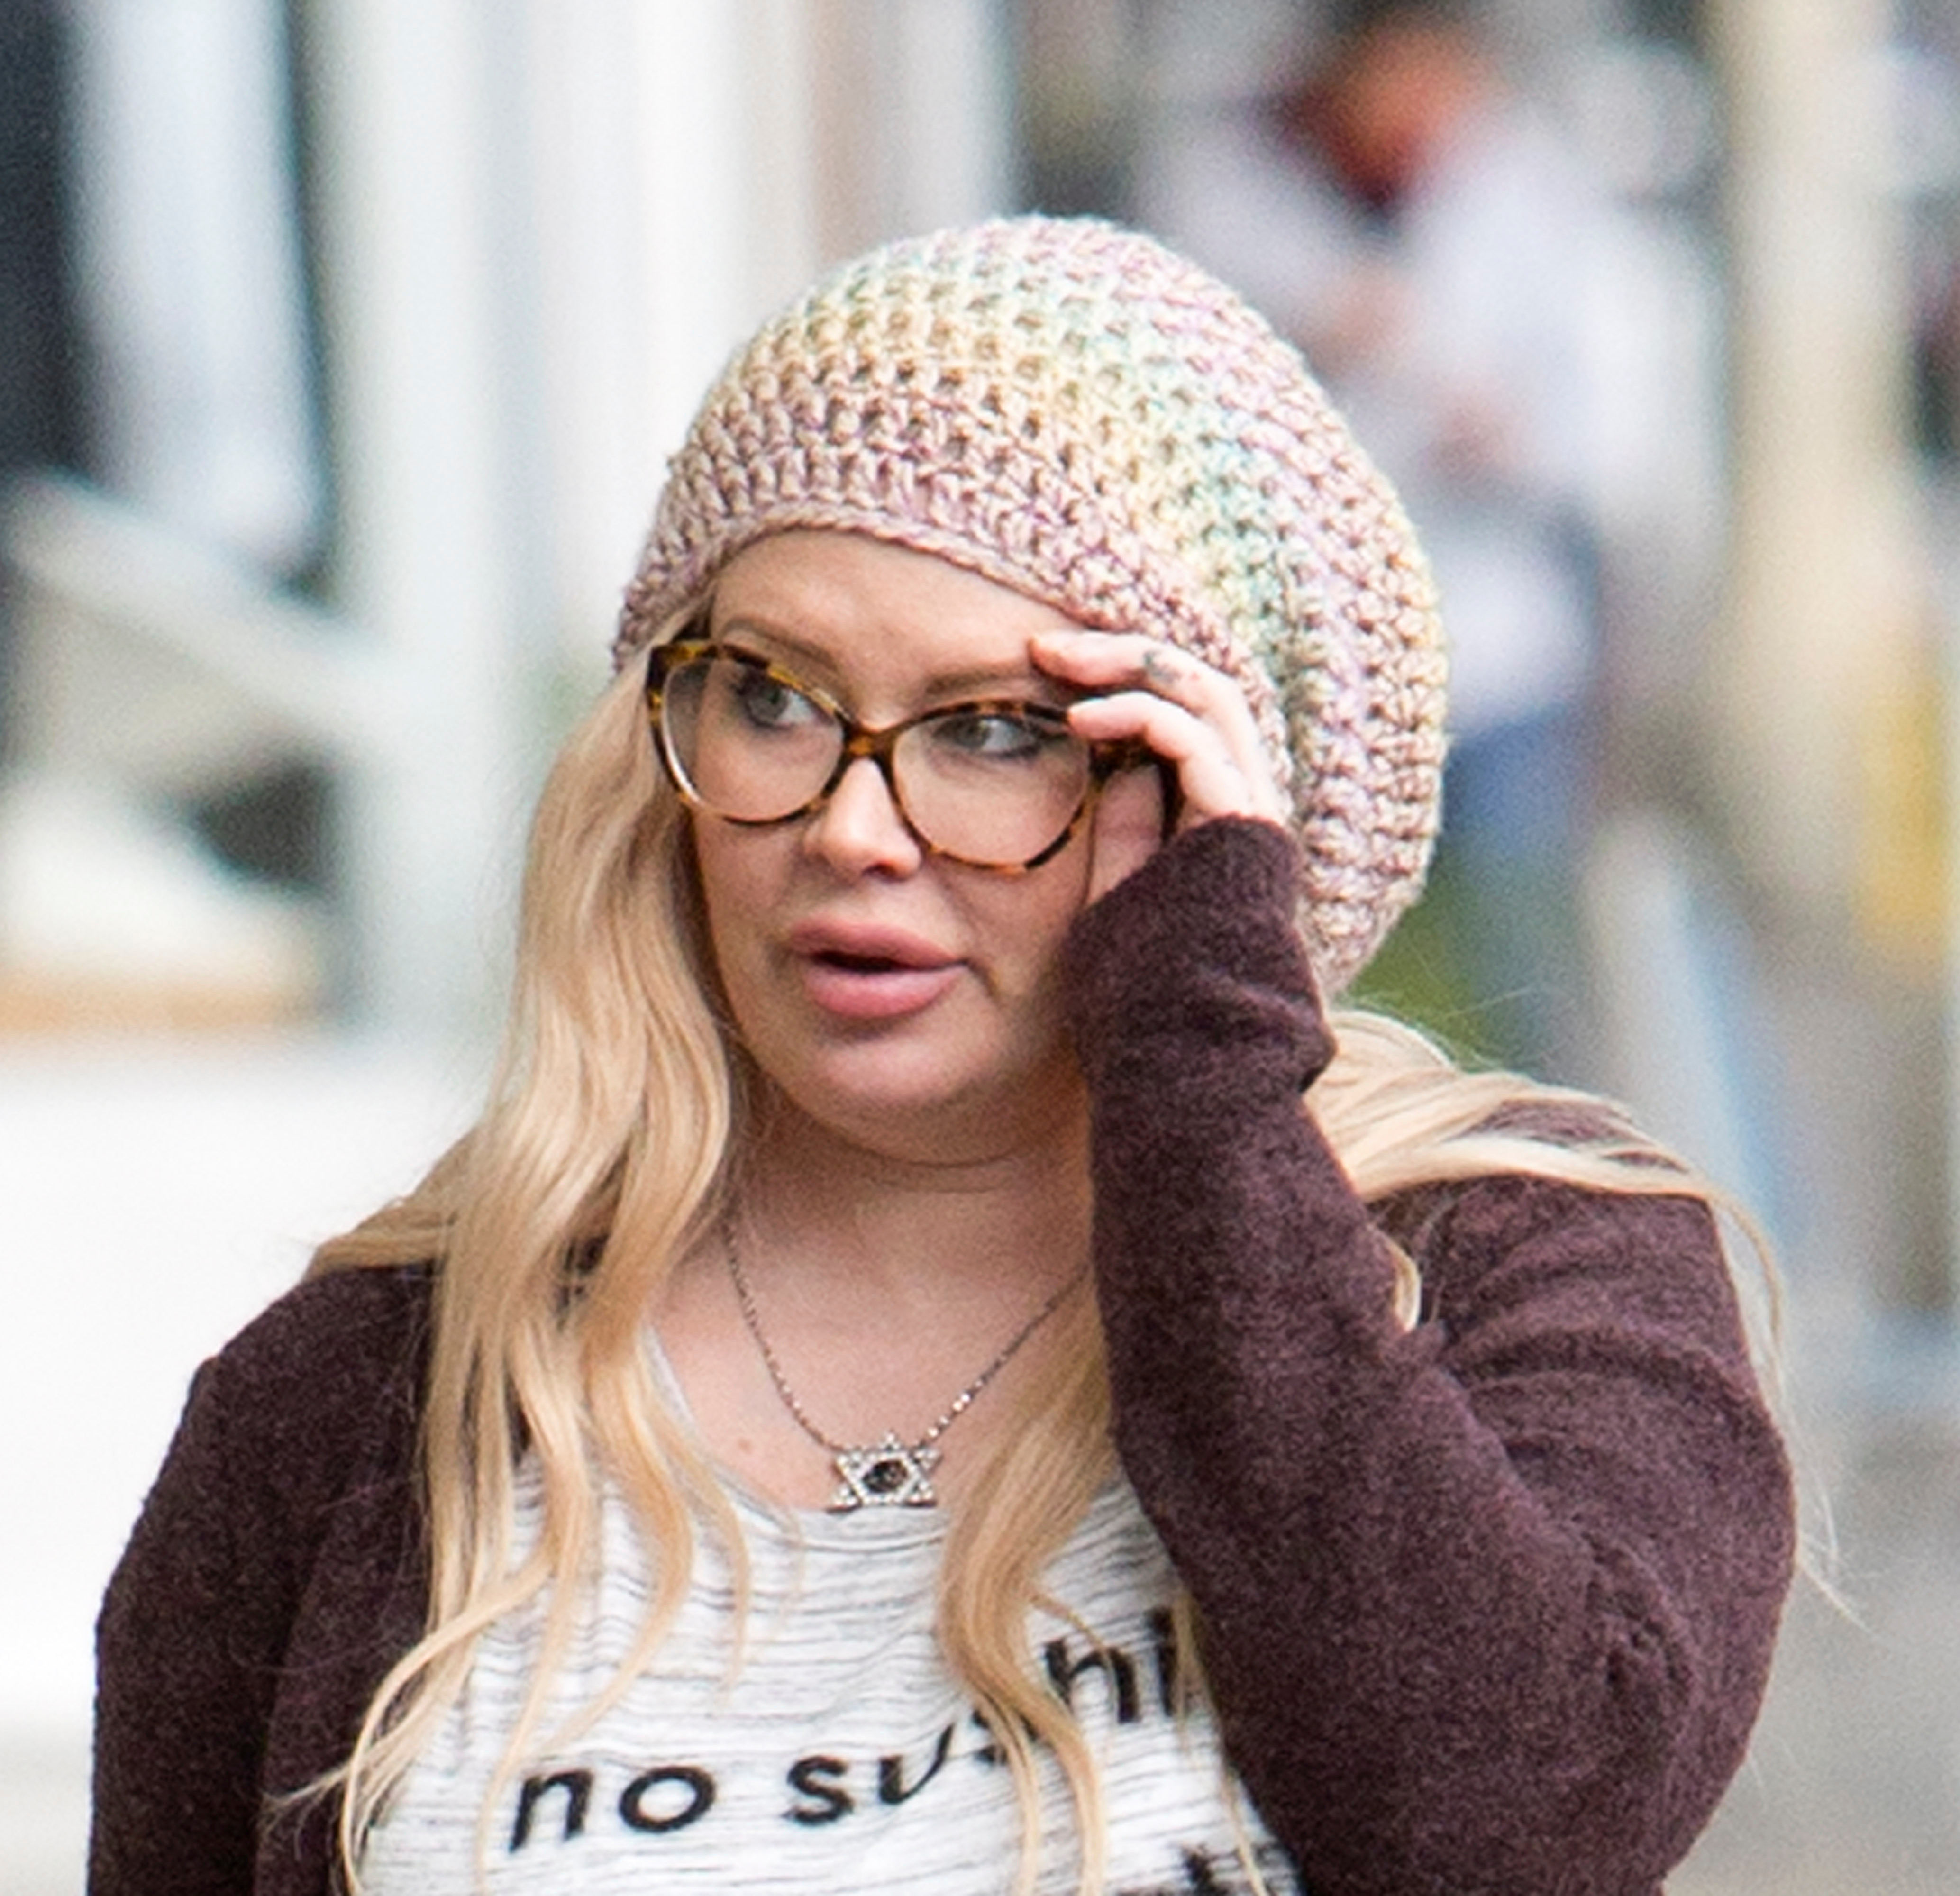 Pregnant Jenna Jameson Looks Unrecognisable From Porn Star Heyday As She Covers Up In Maternity Wear